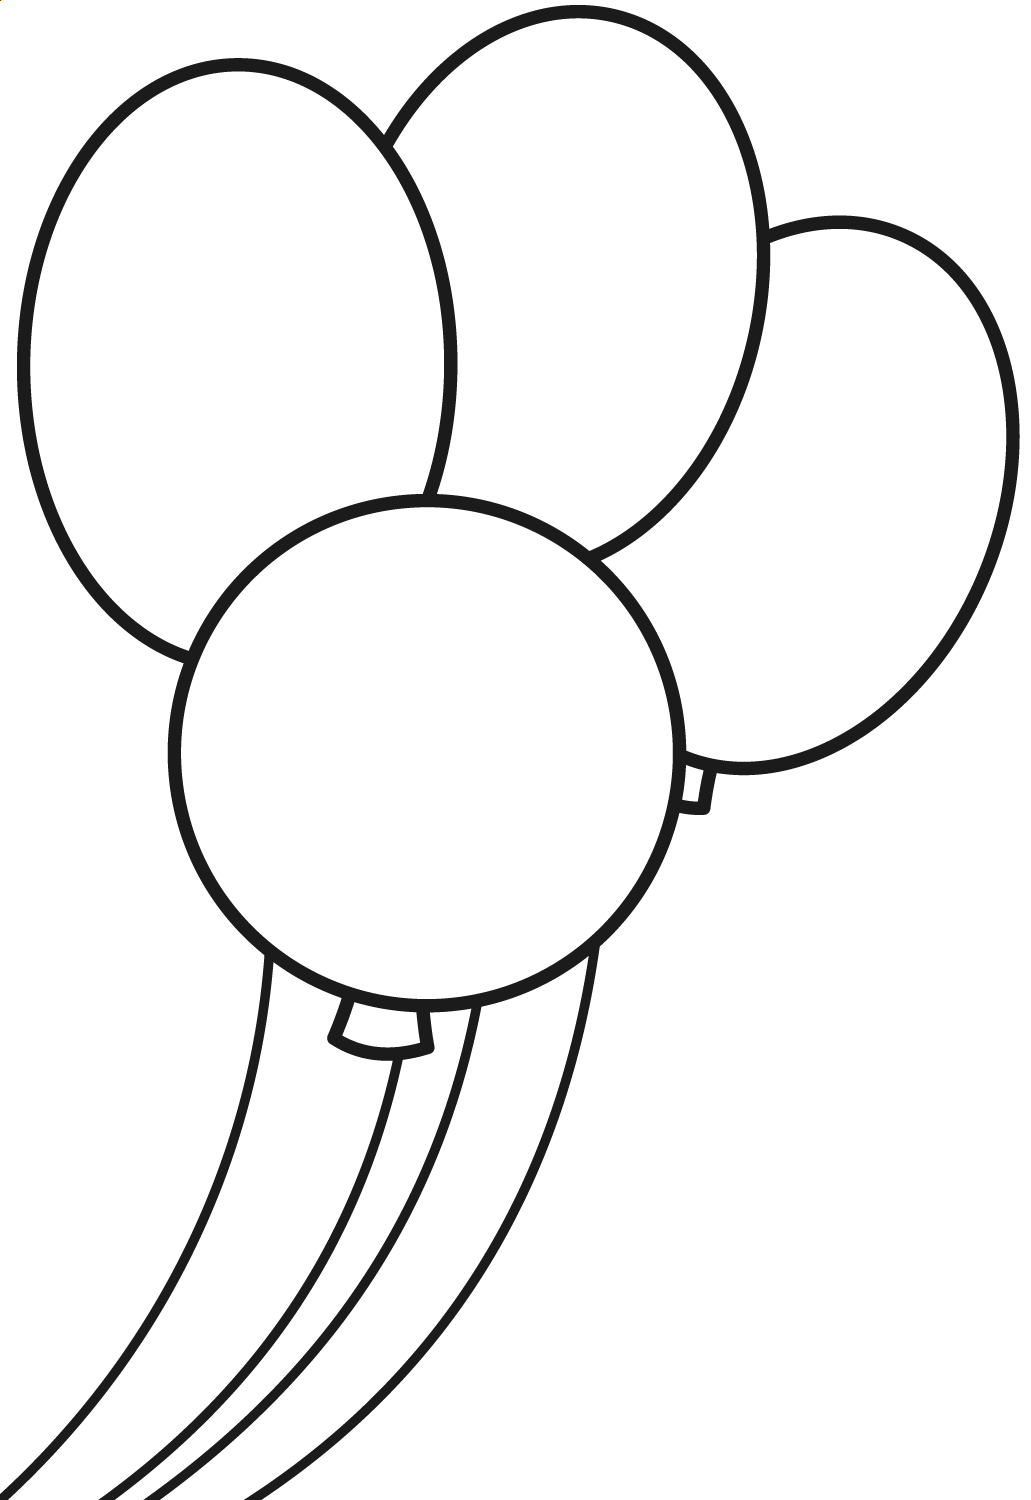 Four Balloon Coloring Page